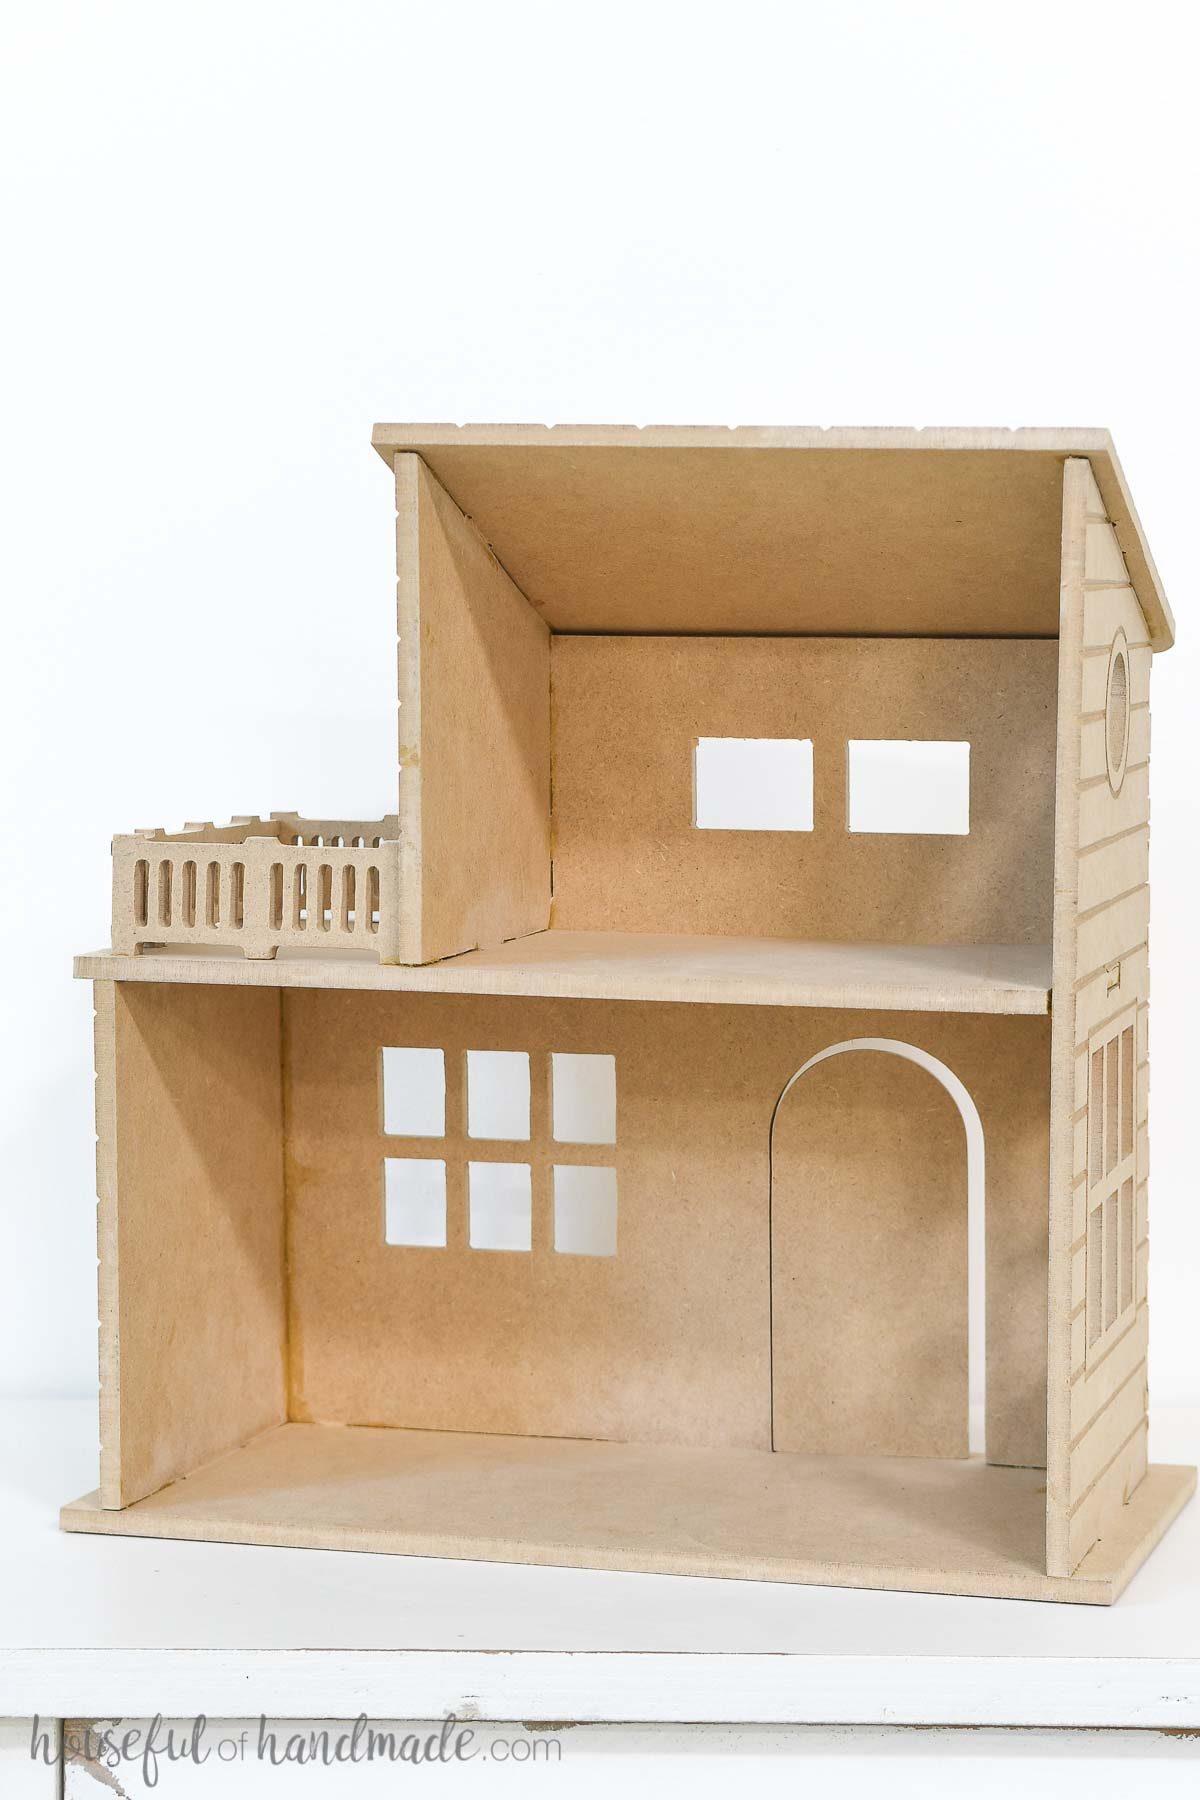 The inside of the two story DIY dollhouse made from MDF. 